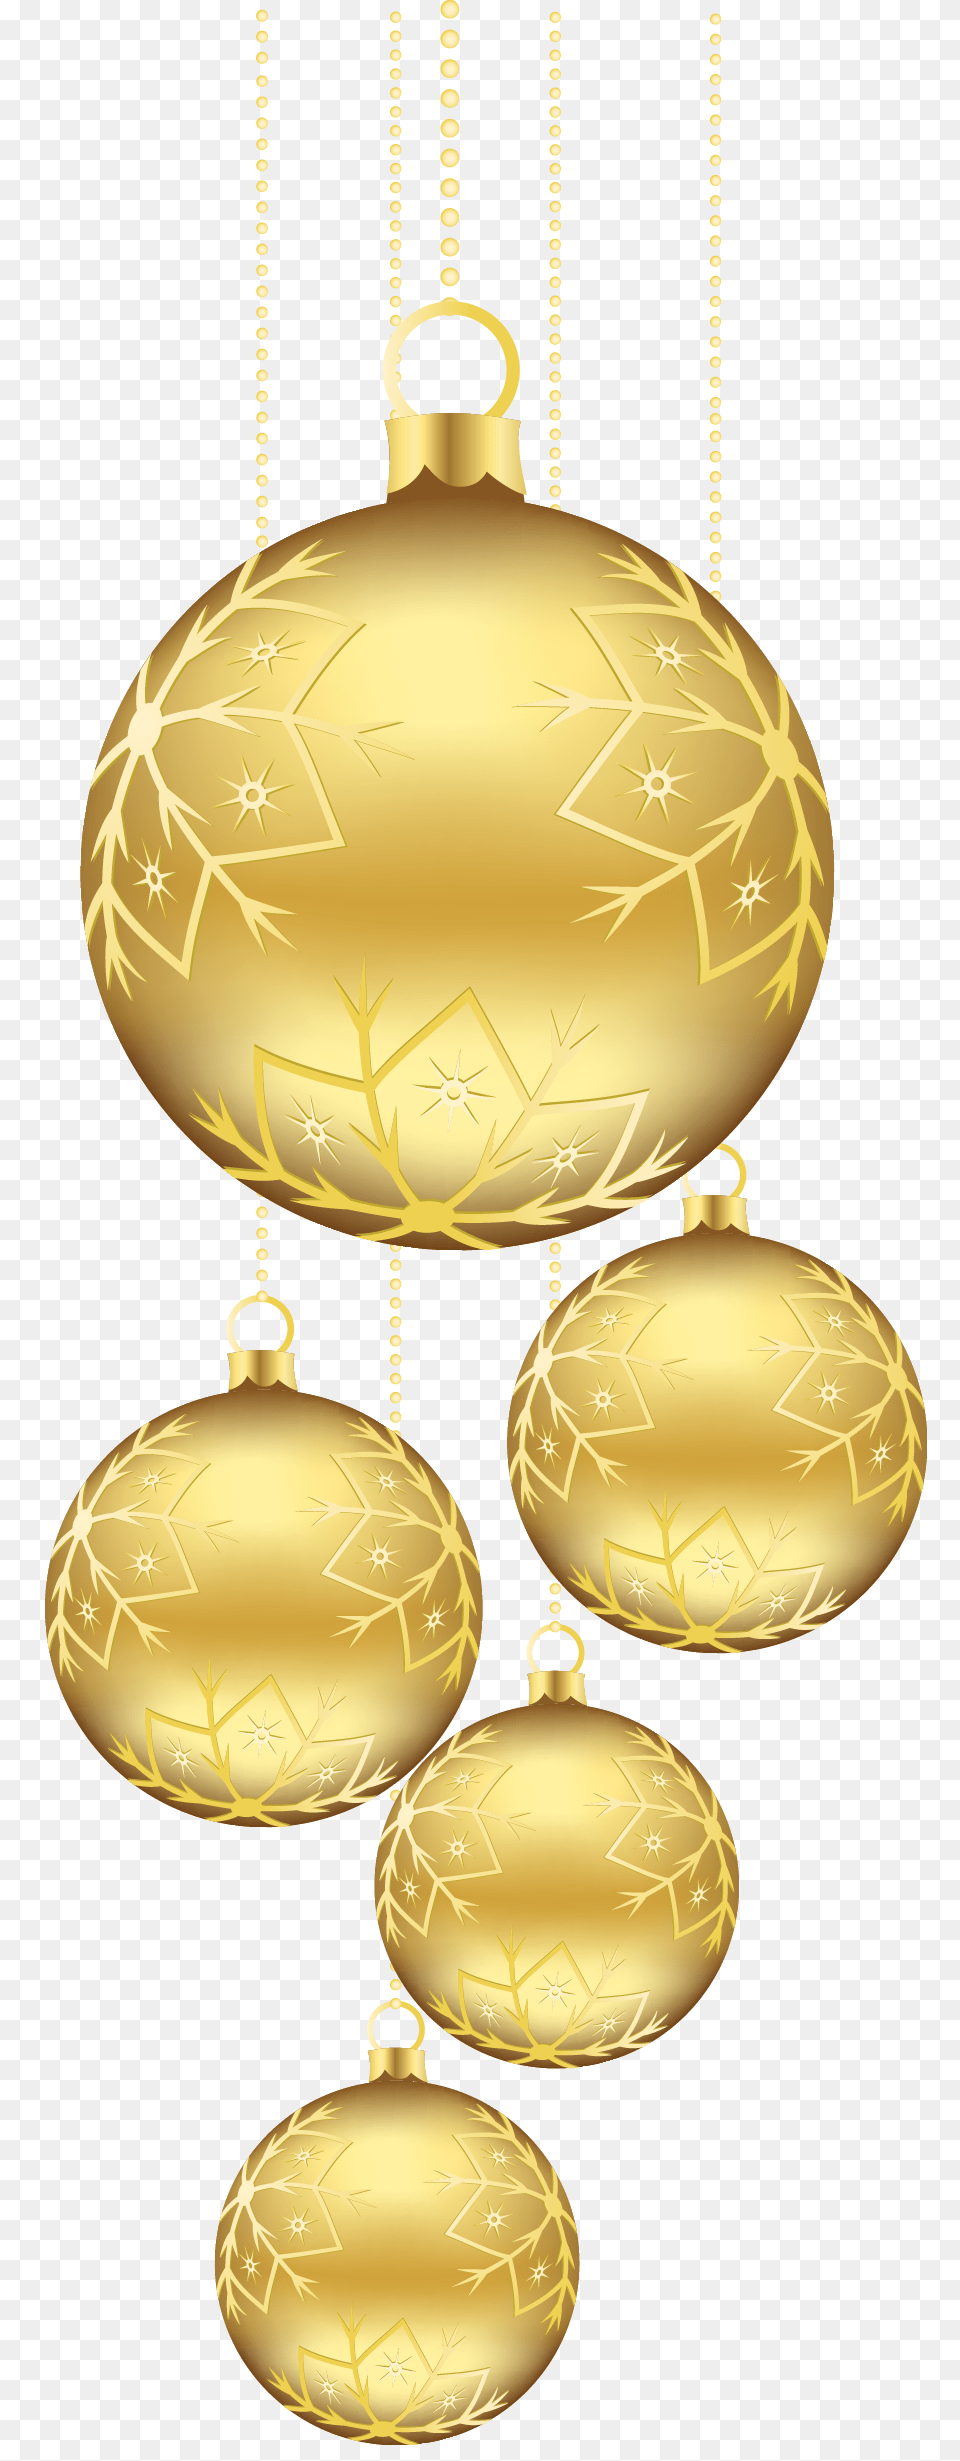 Christmas Ornaments Gold Christmas Balls Ornaments Christmas Golden Ball, Accessories, Jewelry, Pendant Png